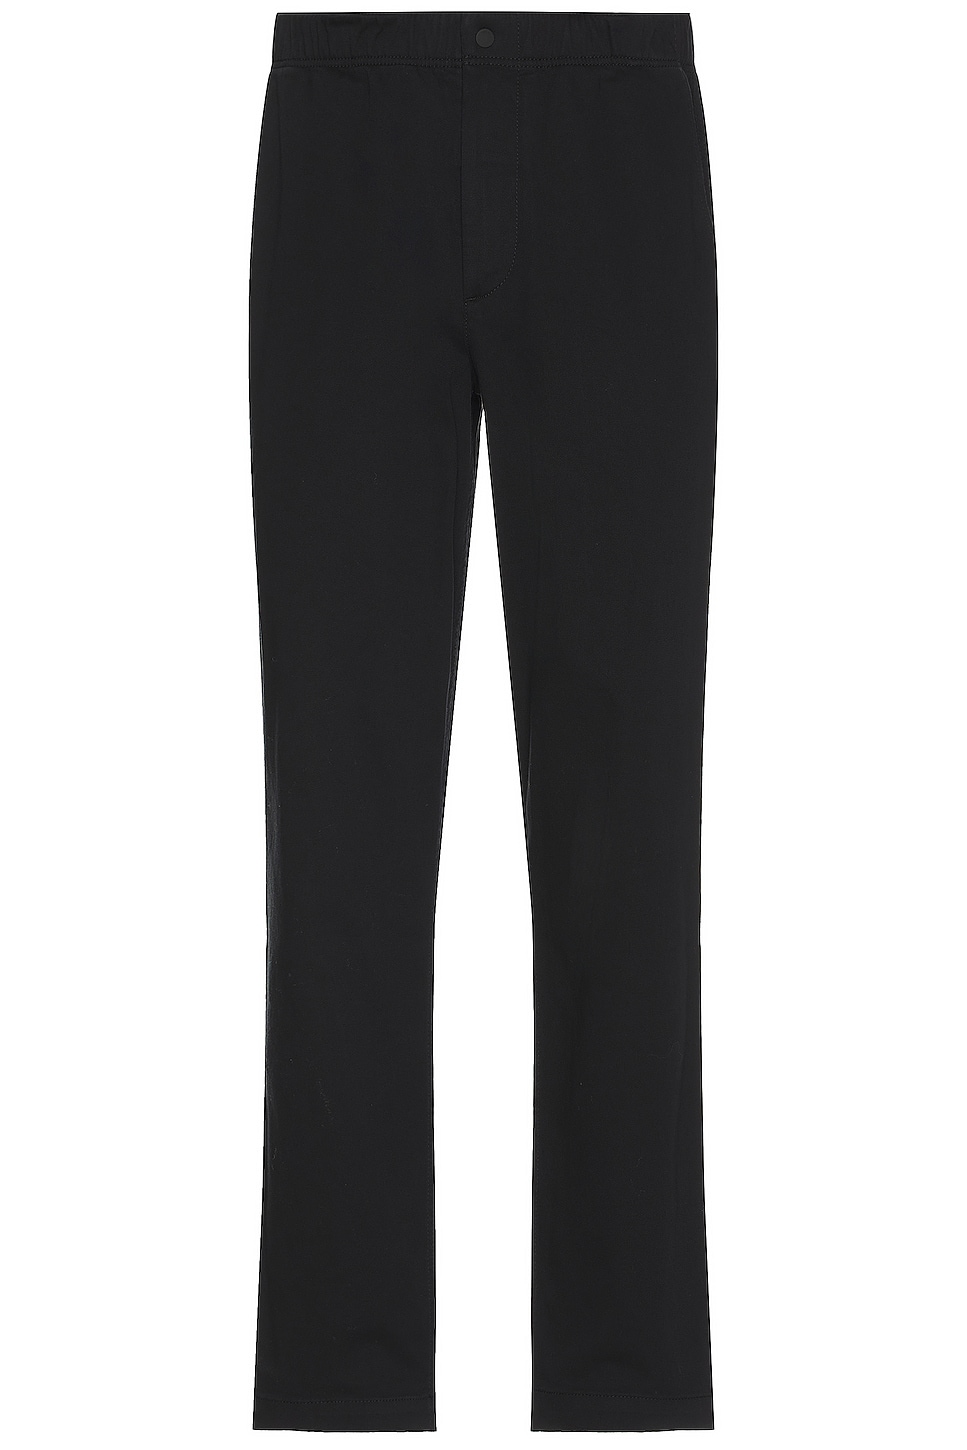 Image 1 of Norse Projects Ezra Relaxed Organic Stretch Twill Trouser in Black